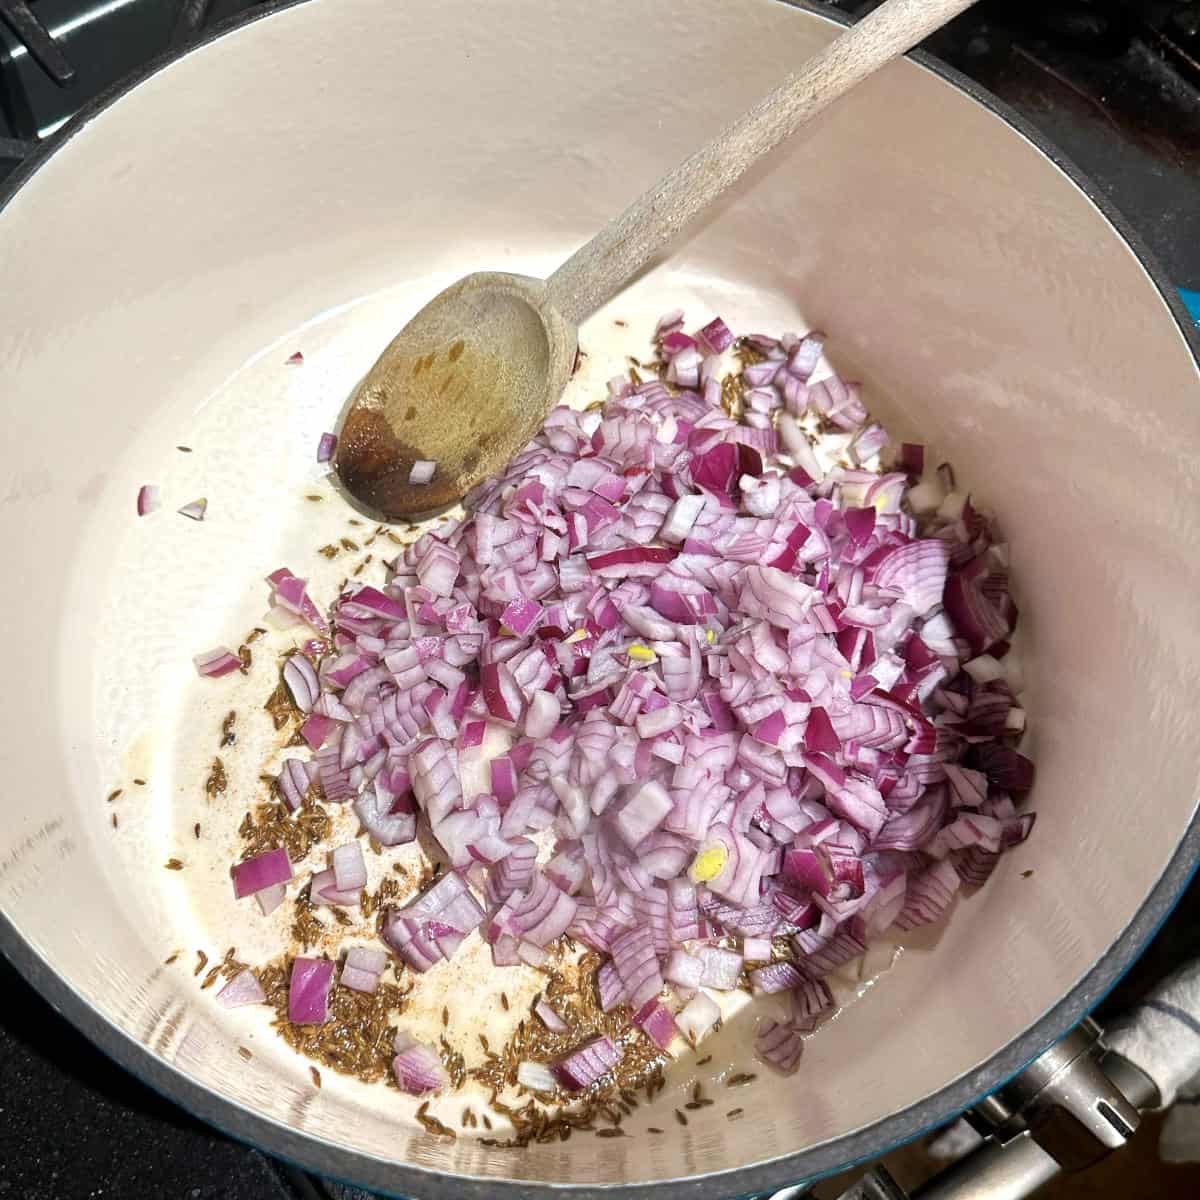 Onions added to cumin seeds in Dutch oven.